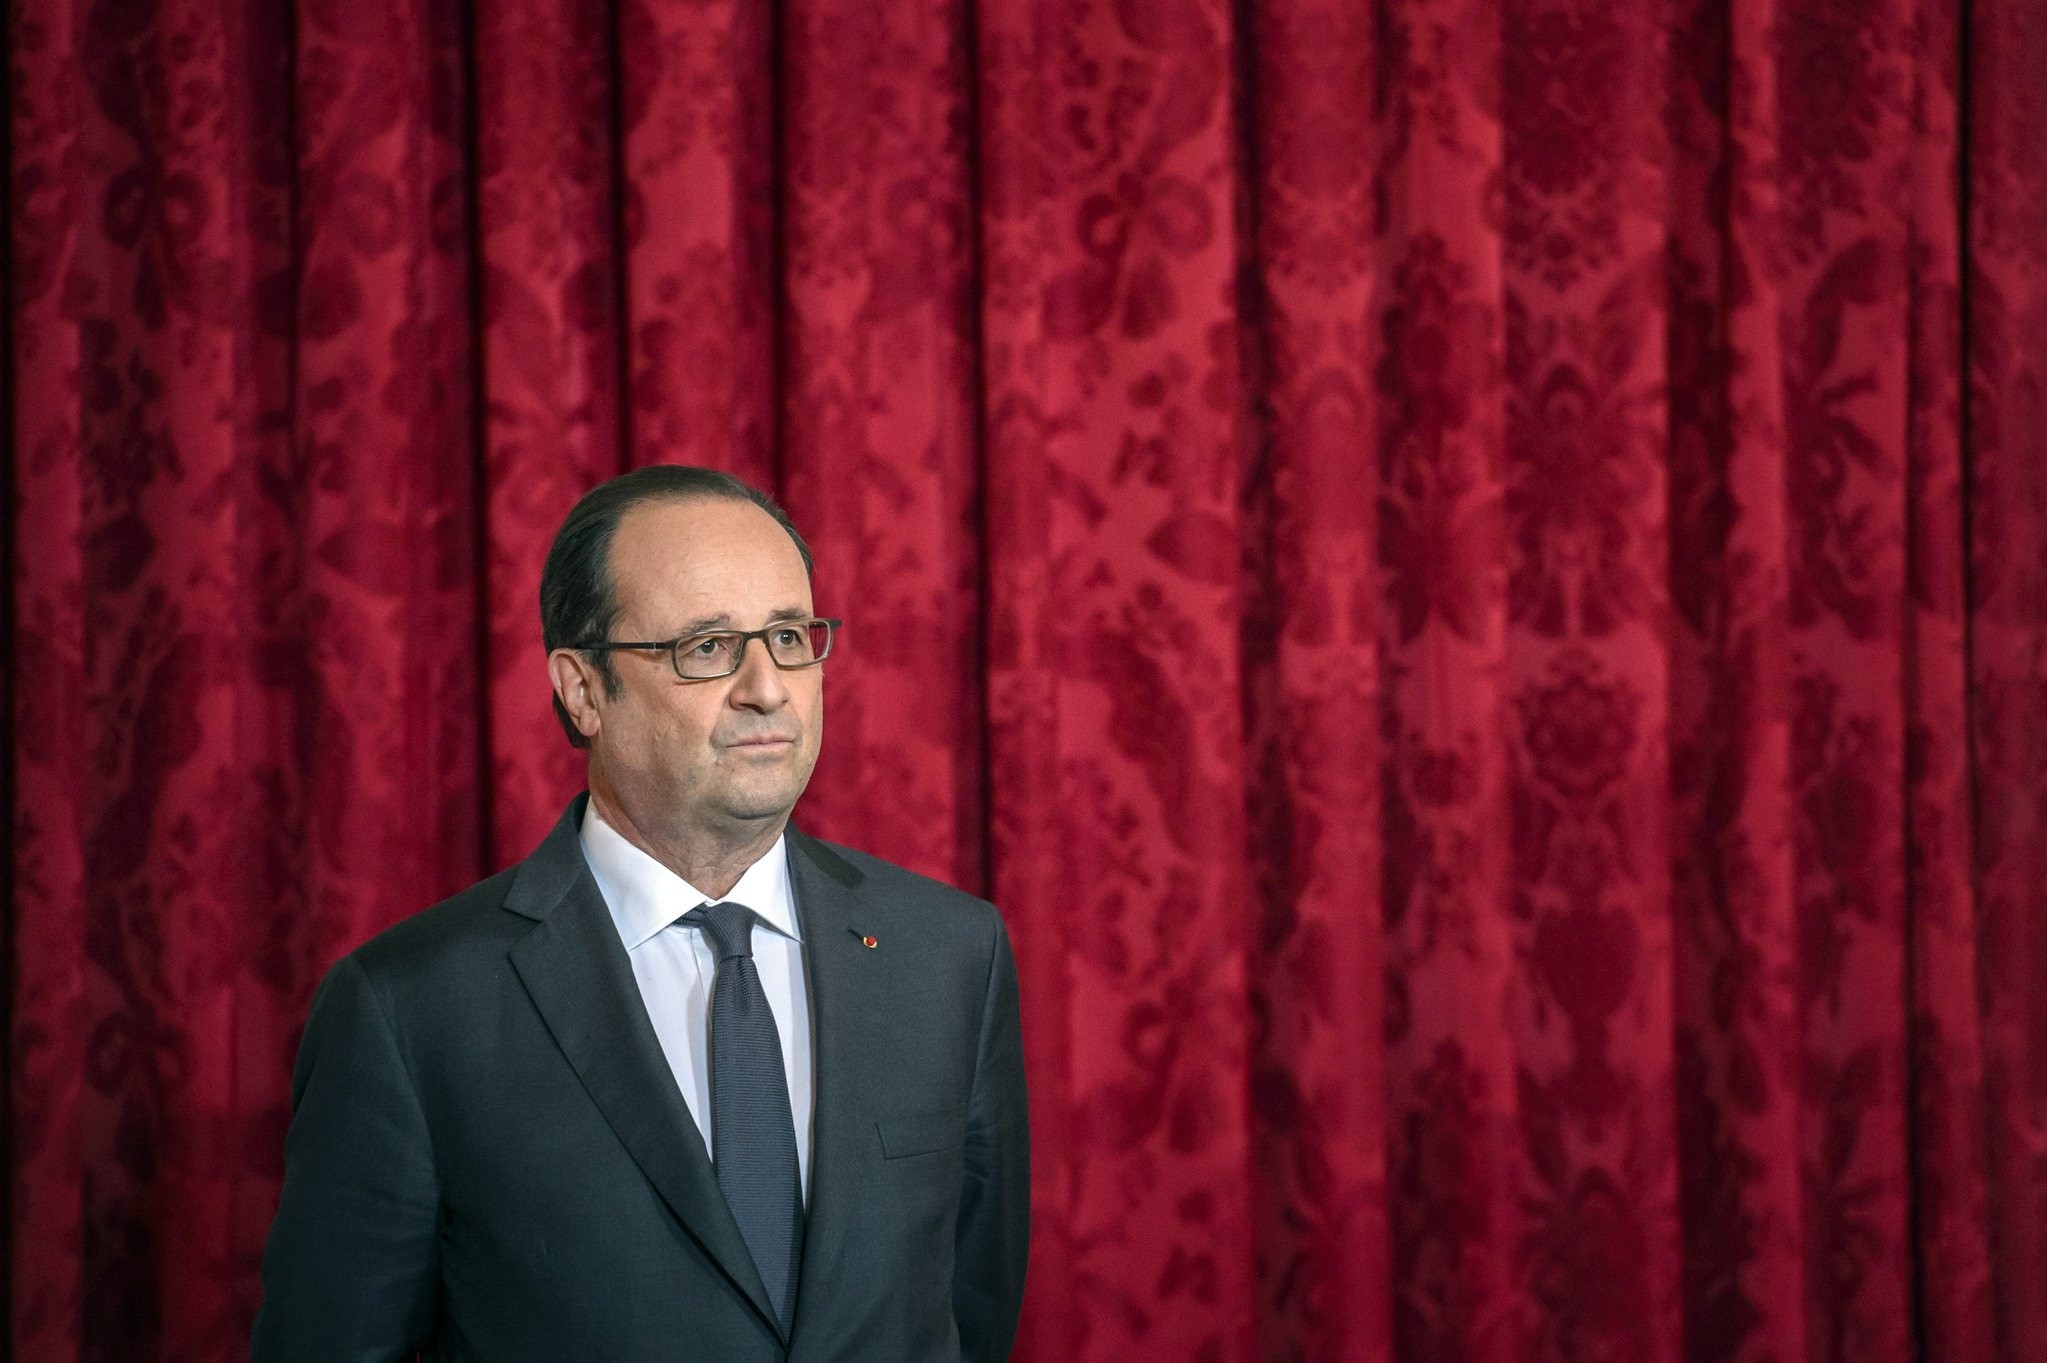  French President Francois Hollande at the Elysee Presidential Palace in Paris, France, 16 January 2017. (EPA Photo)